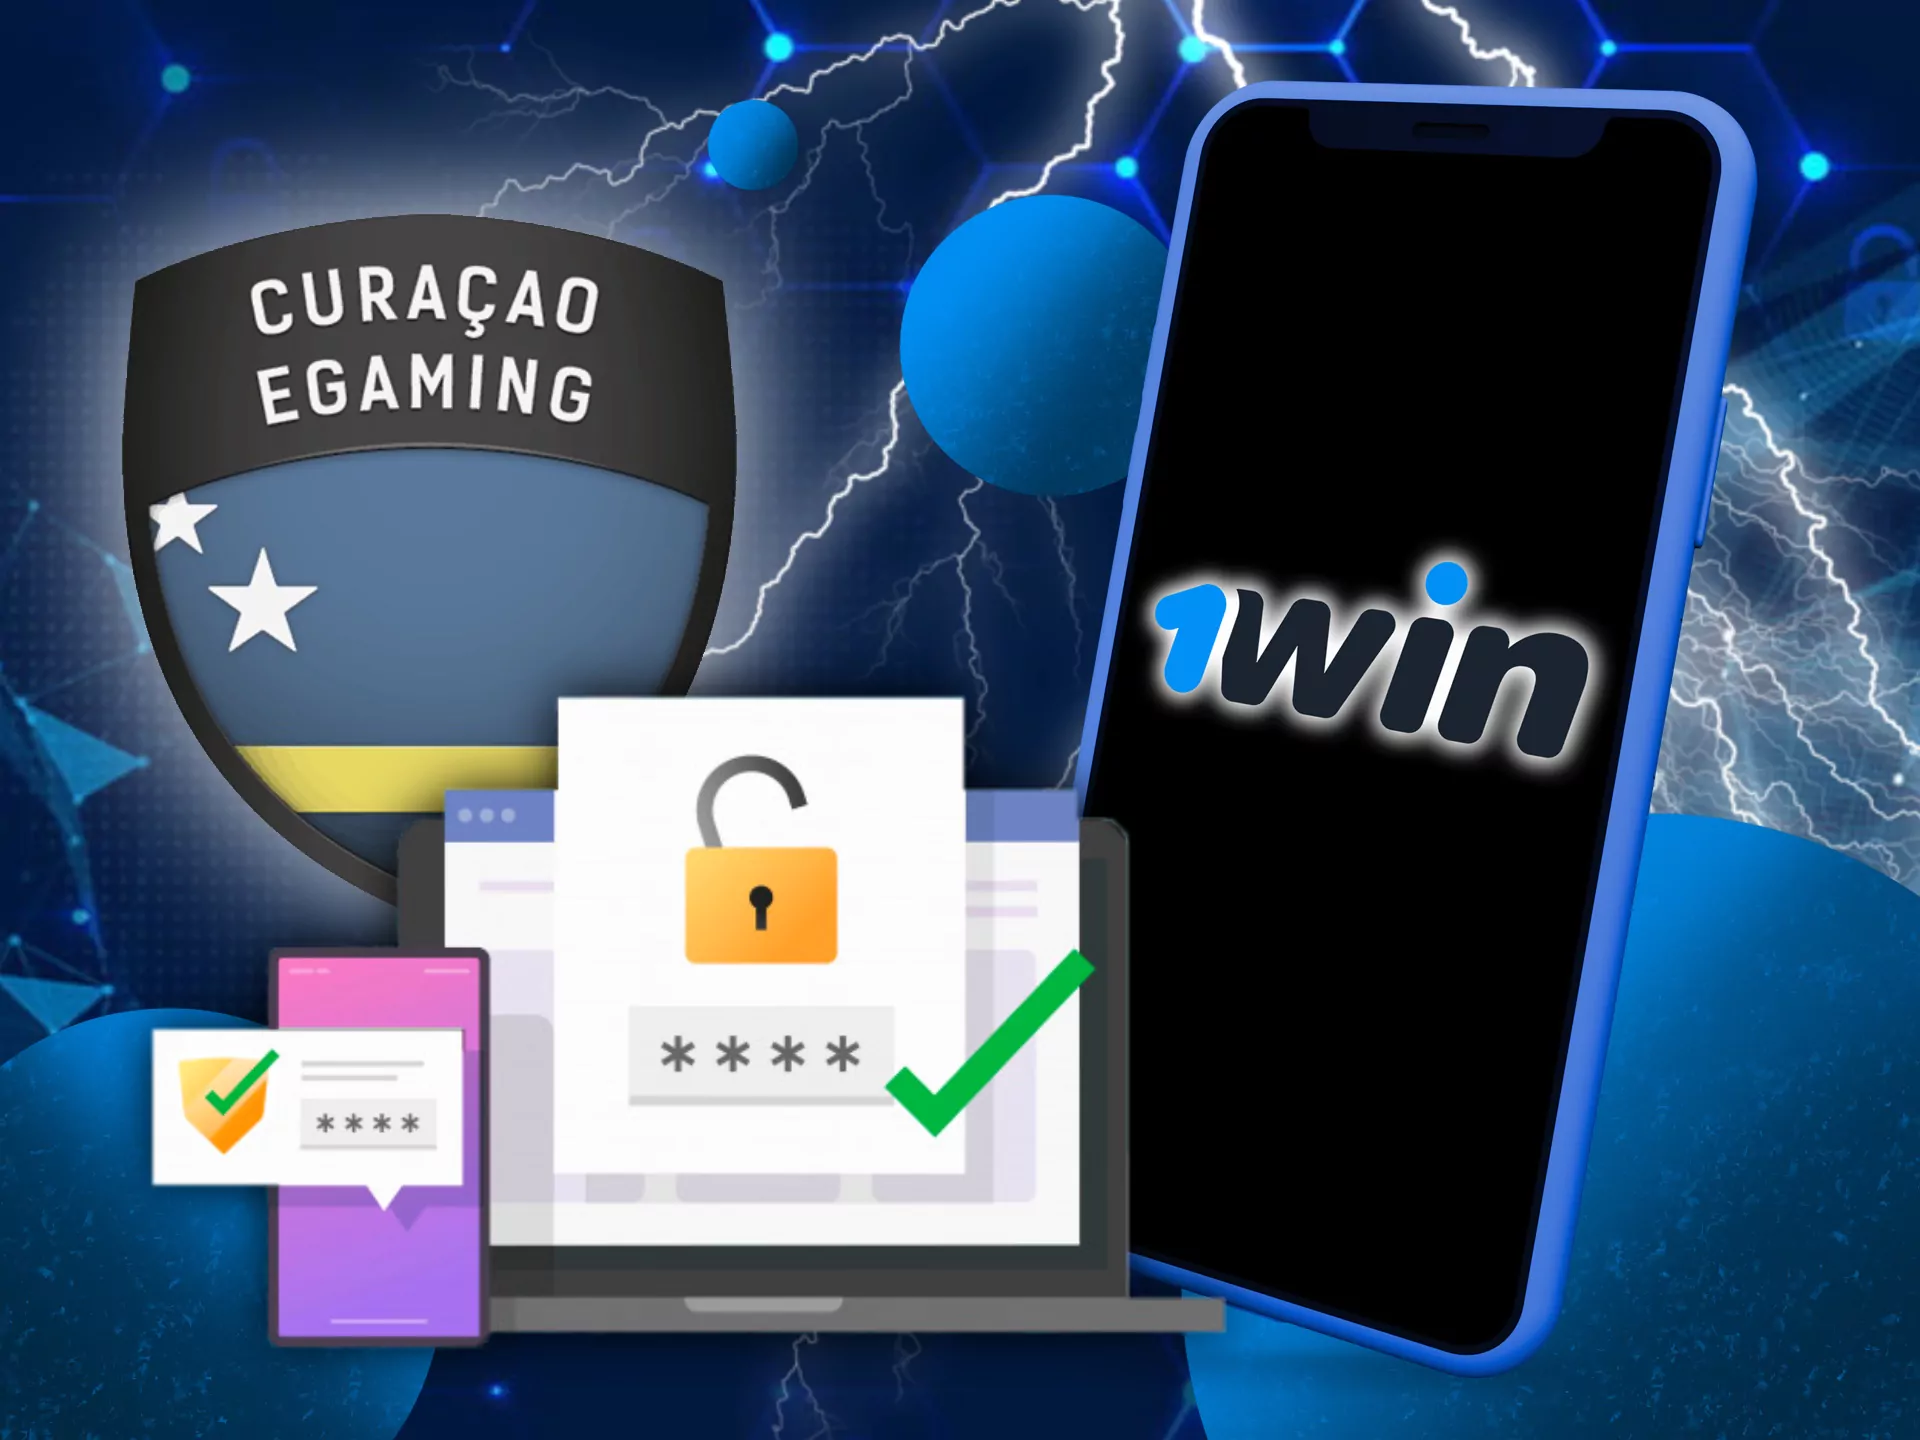 1win is licensed by Curacao so players can be sure of the reliability of the bookmaker's office.